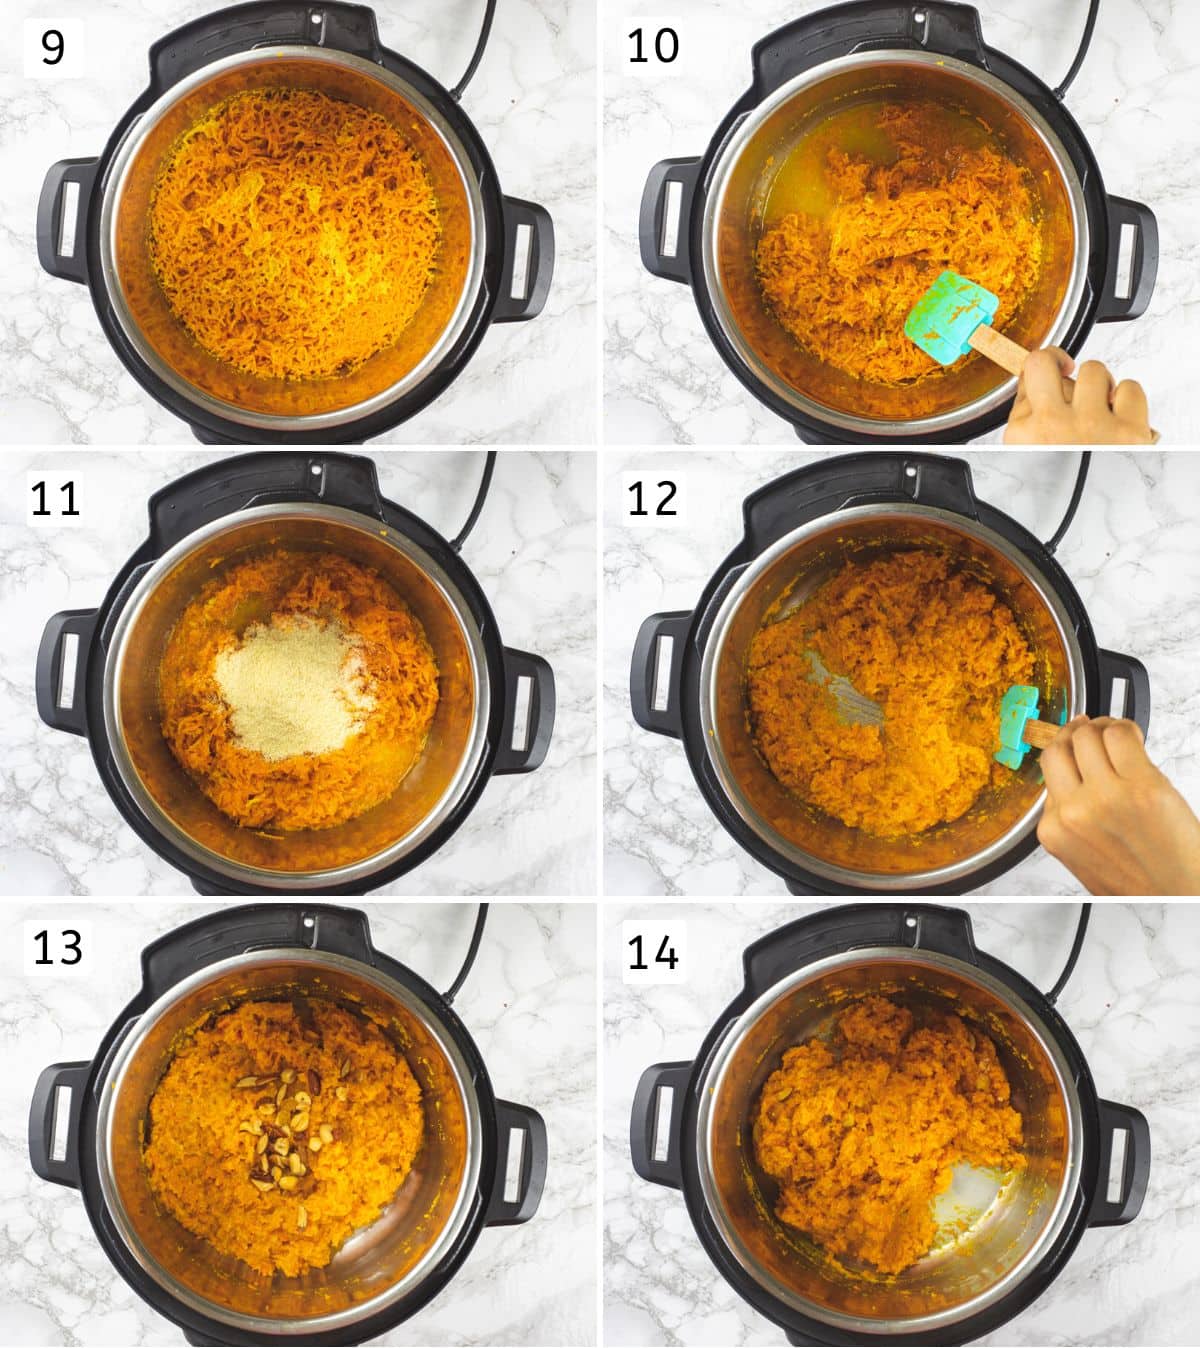 Collage of 6 images showing cooked carrots, adding and cooking almond flour, garnished with nuts.